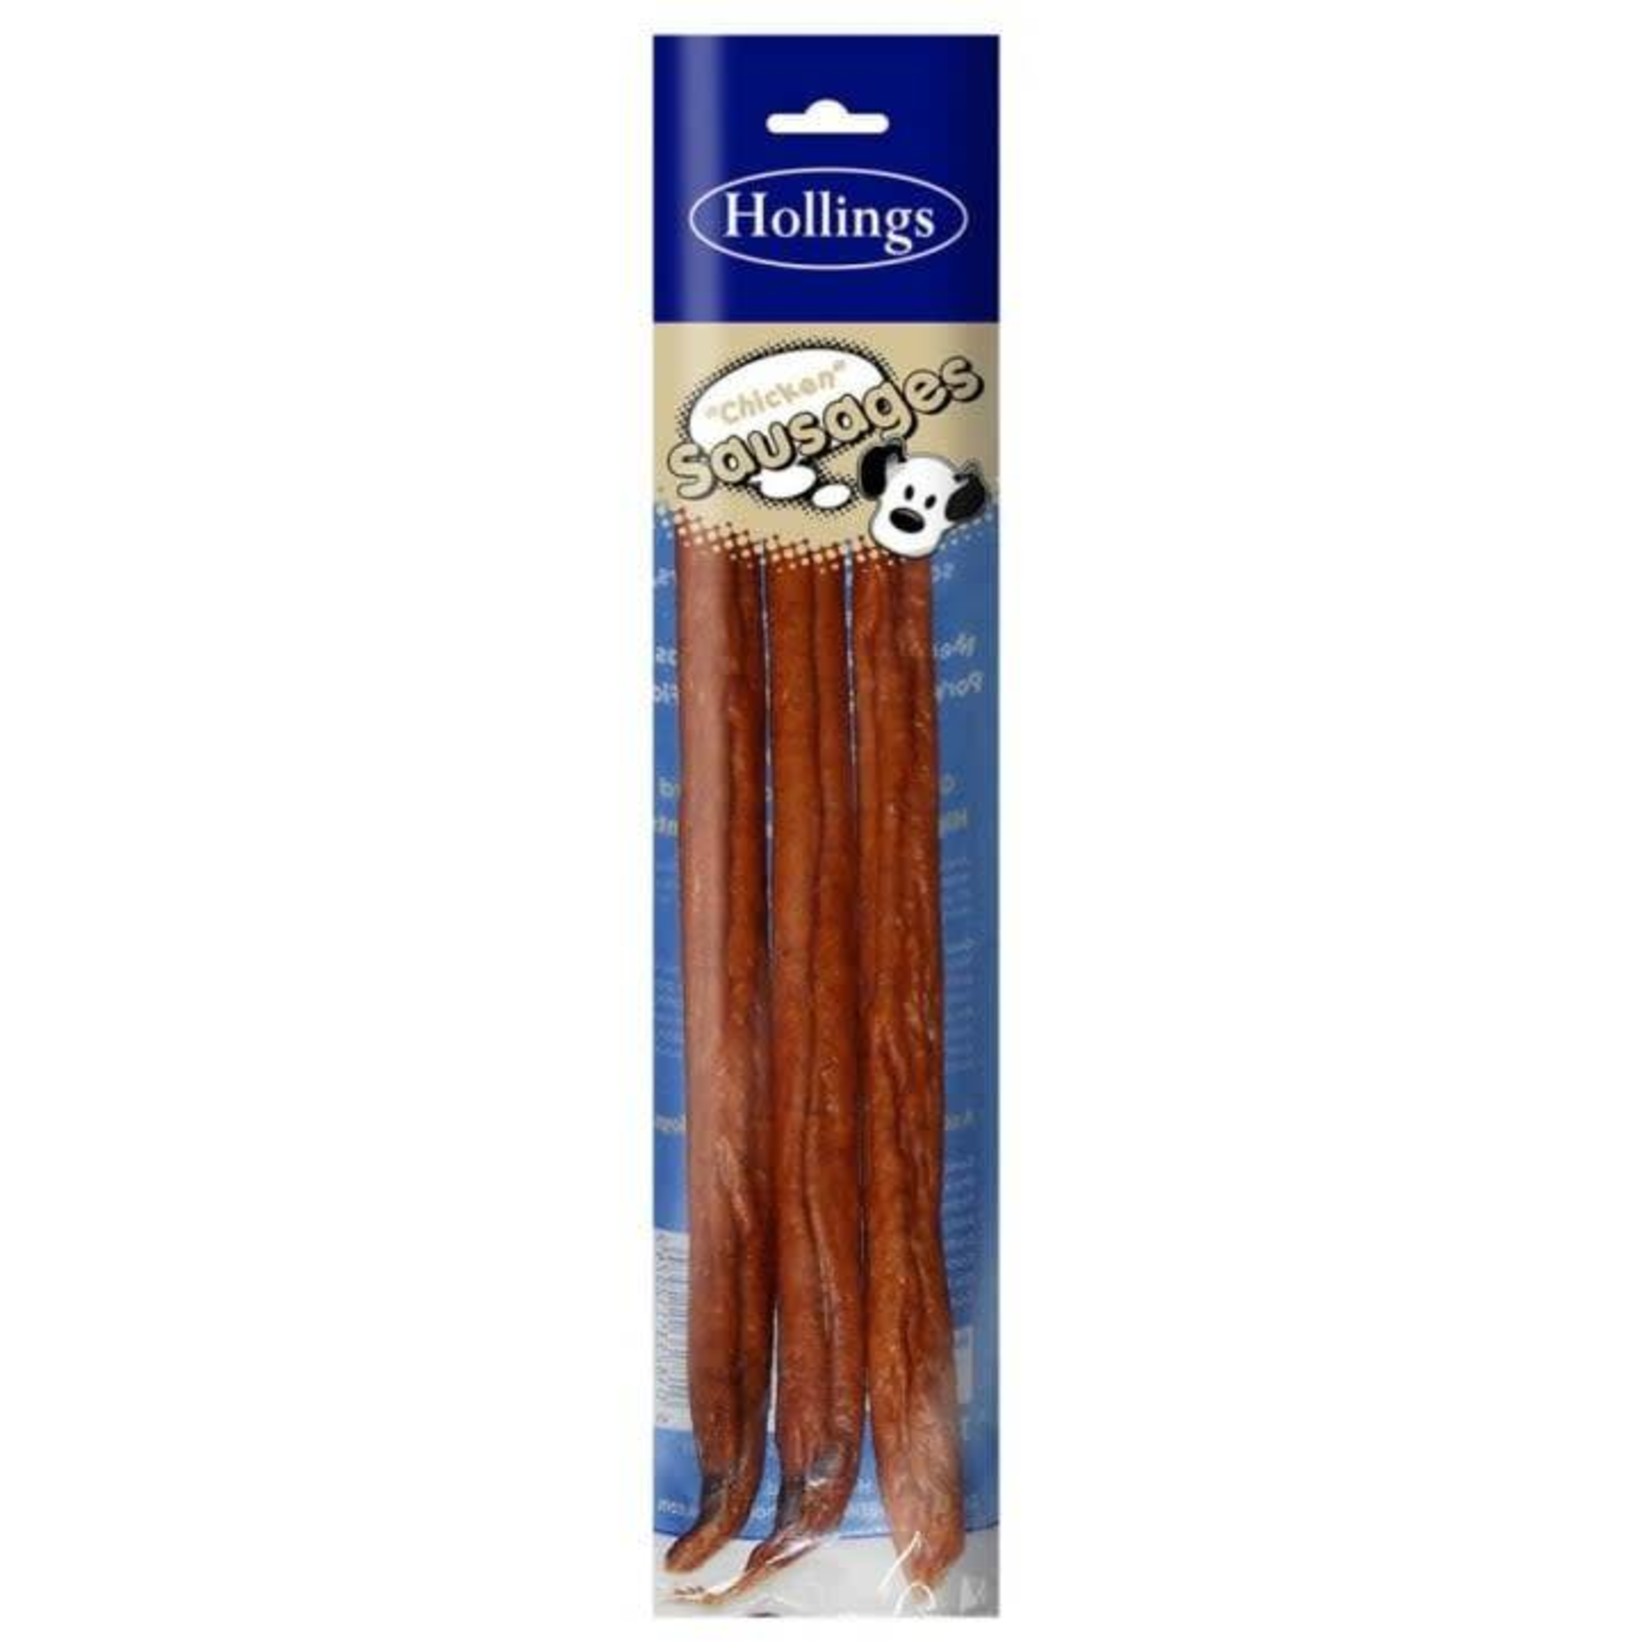 Hollings Chicken Sausages Dog Treat, 3 pack